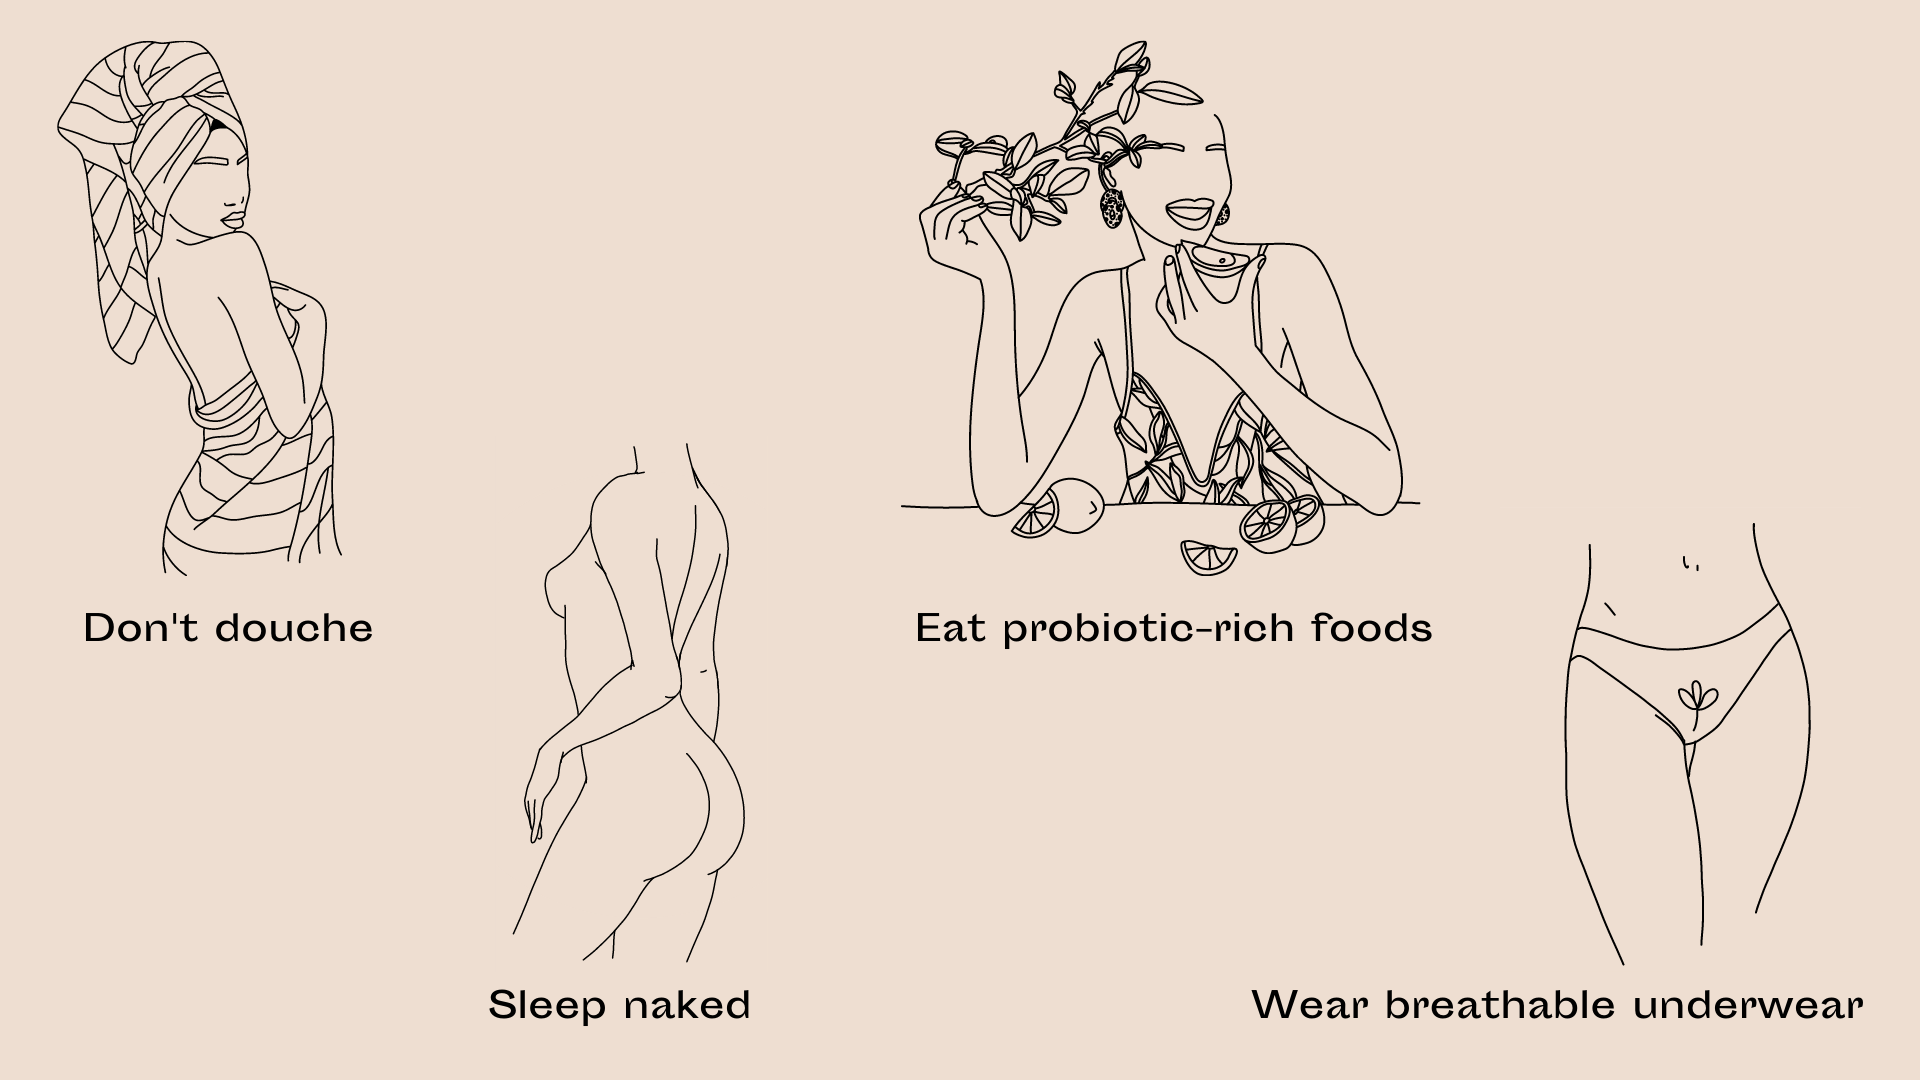 tips for healthy vaginal microbiome, sleep naked, don’t douche, eat probiotic-rich foods, wear breathable underwear